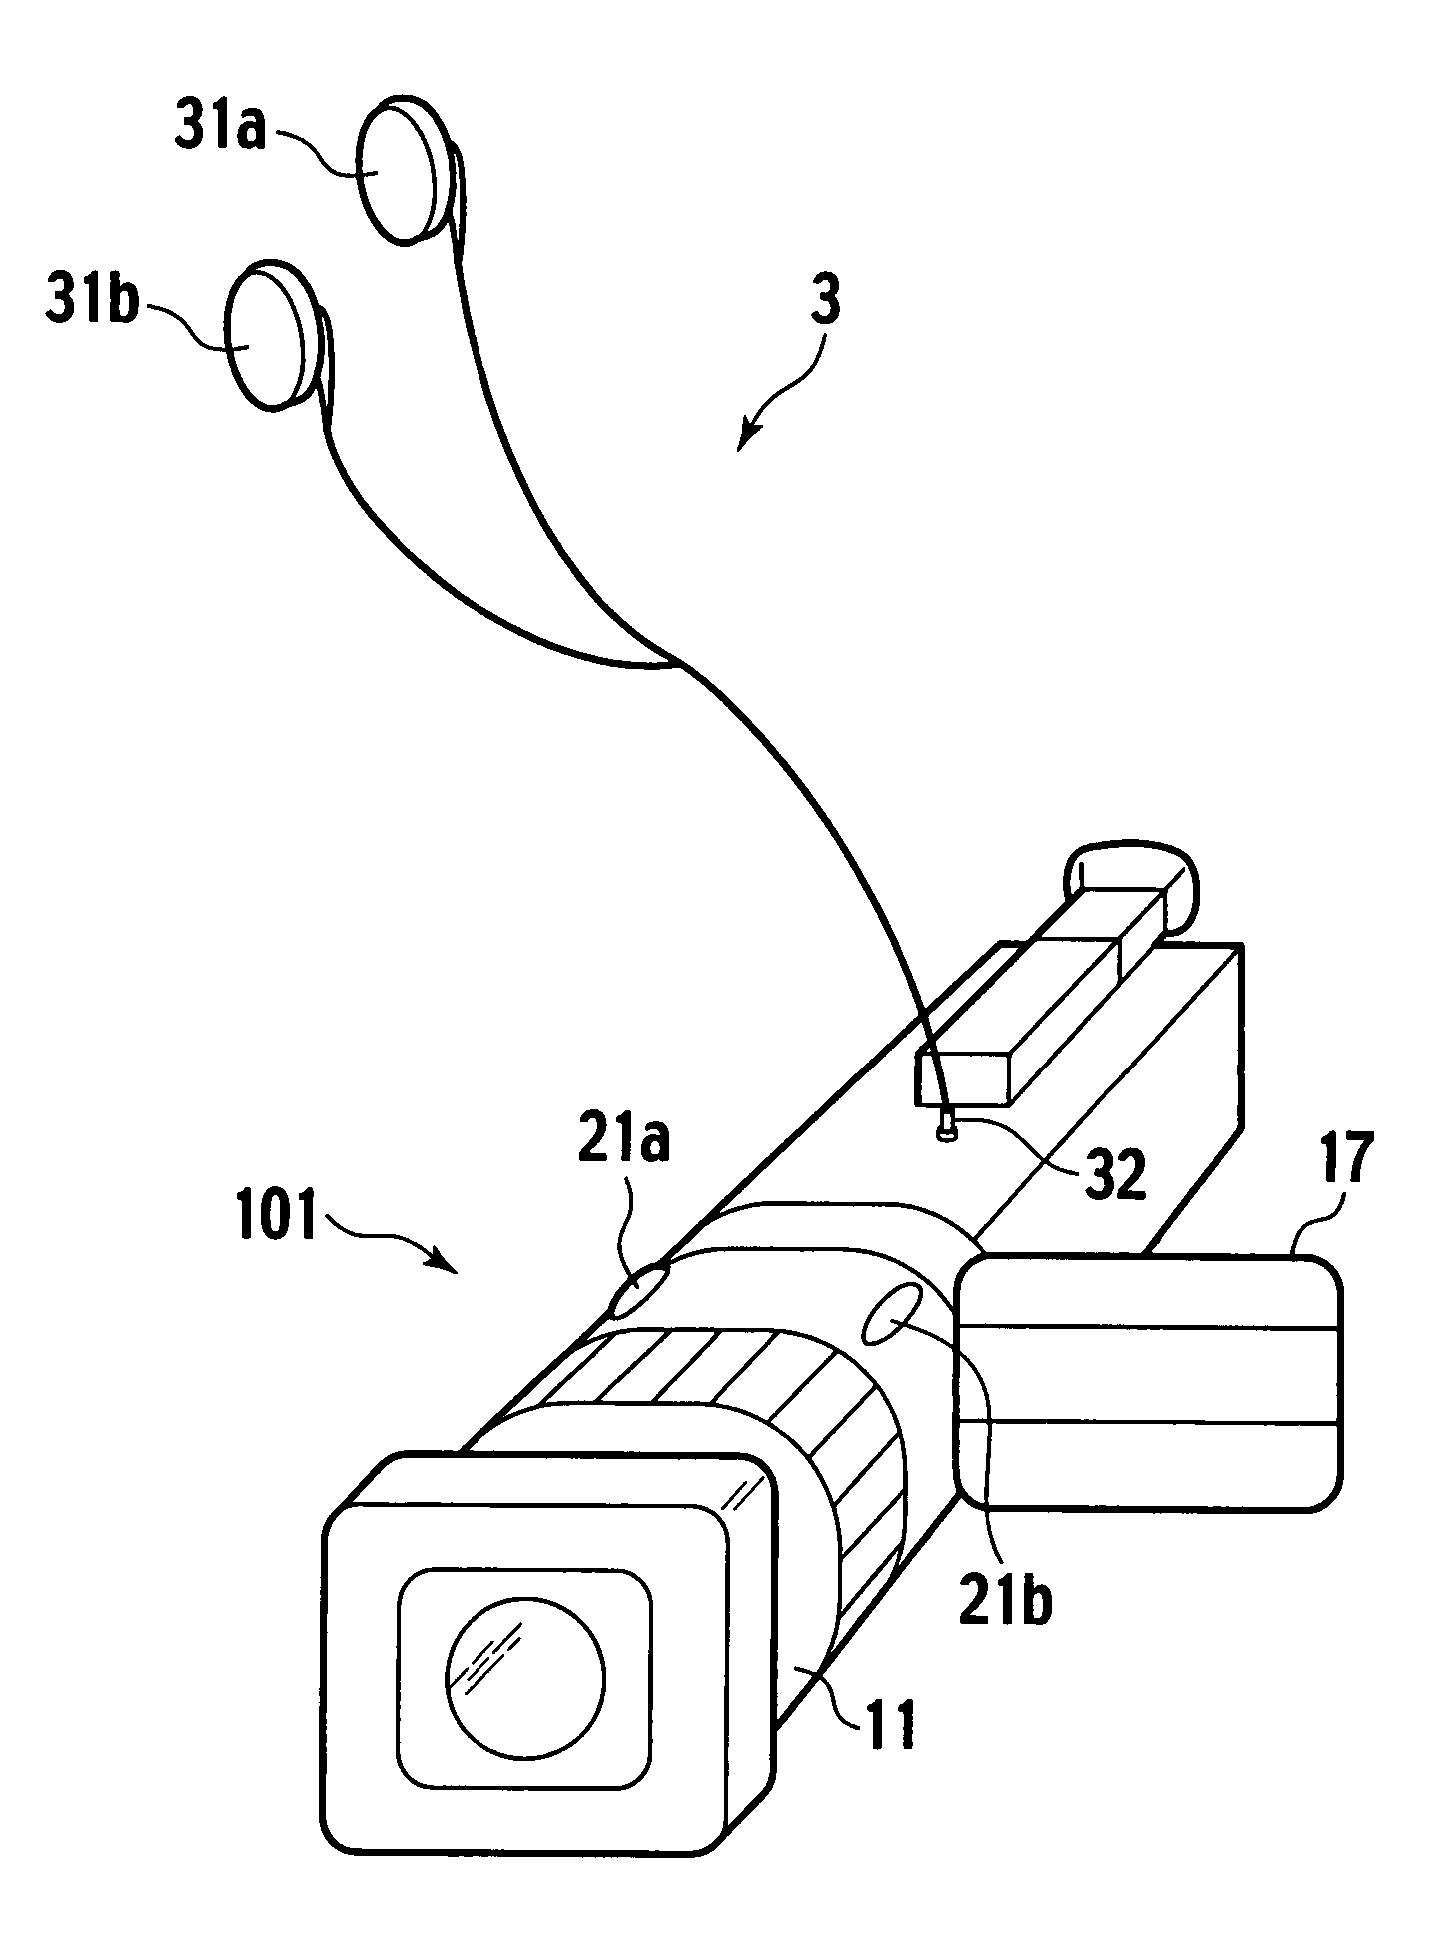 Video-audio recording apparatus and method, and video-audio reproducing apparatus and method